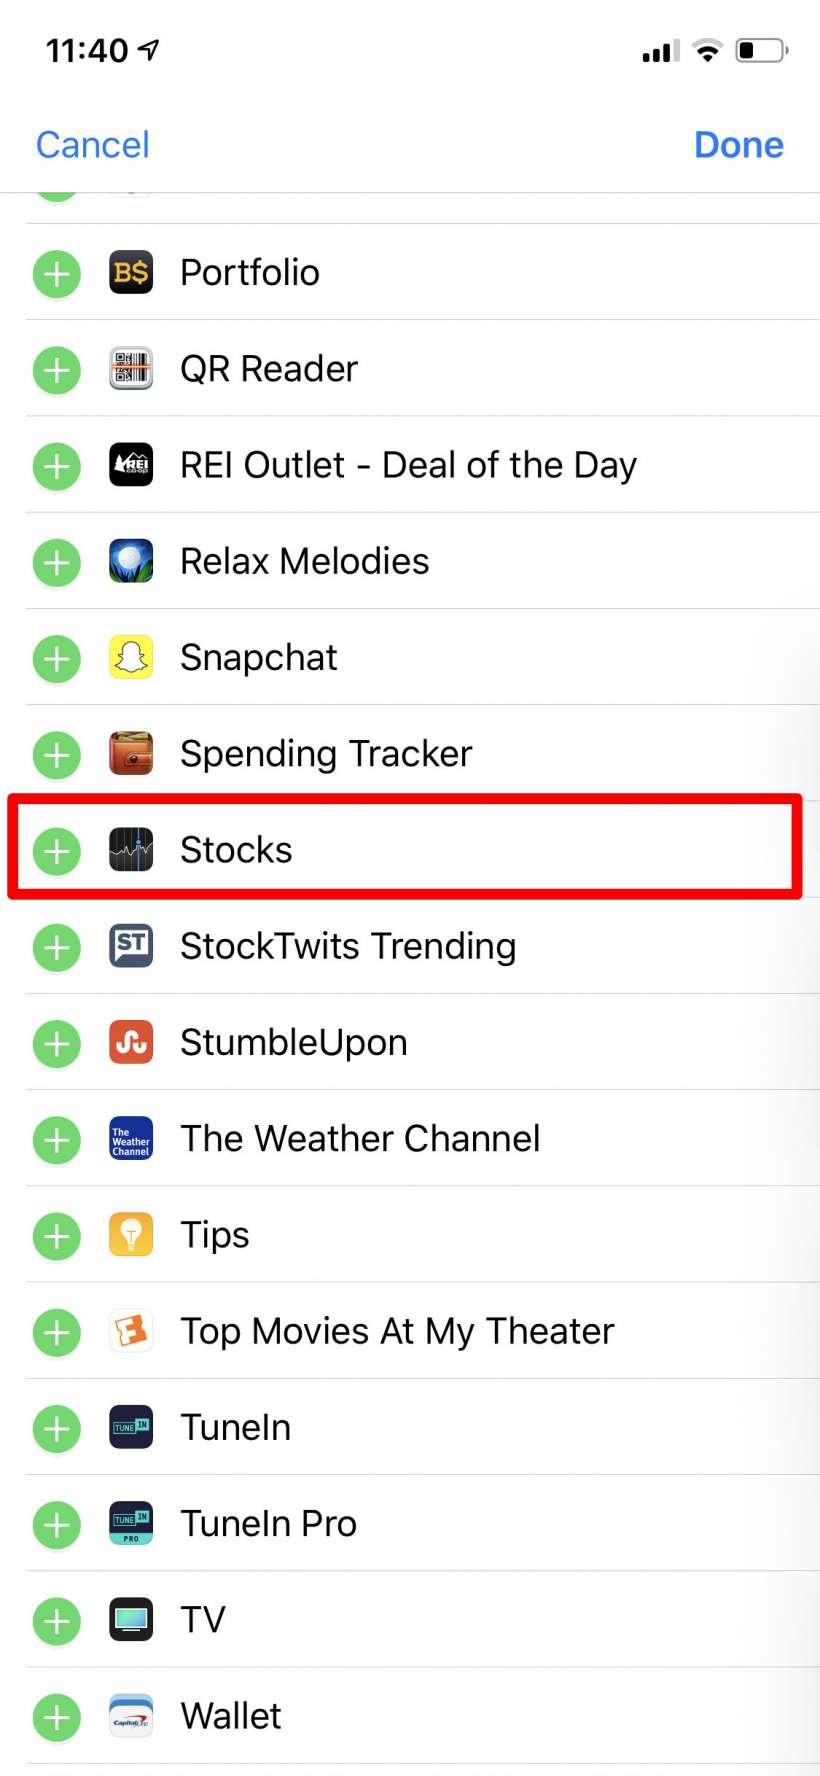 How to follow Bitcoin (BTC), Ethereum (ETH), Ripple (XRP) and other cryptocurrency prices on your Stocks app and Notification Center on iPhone and iPad.